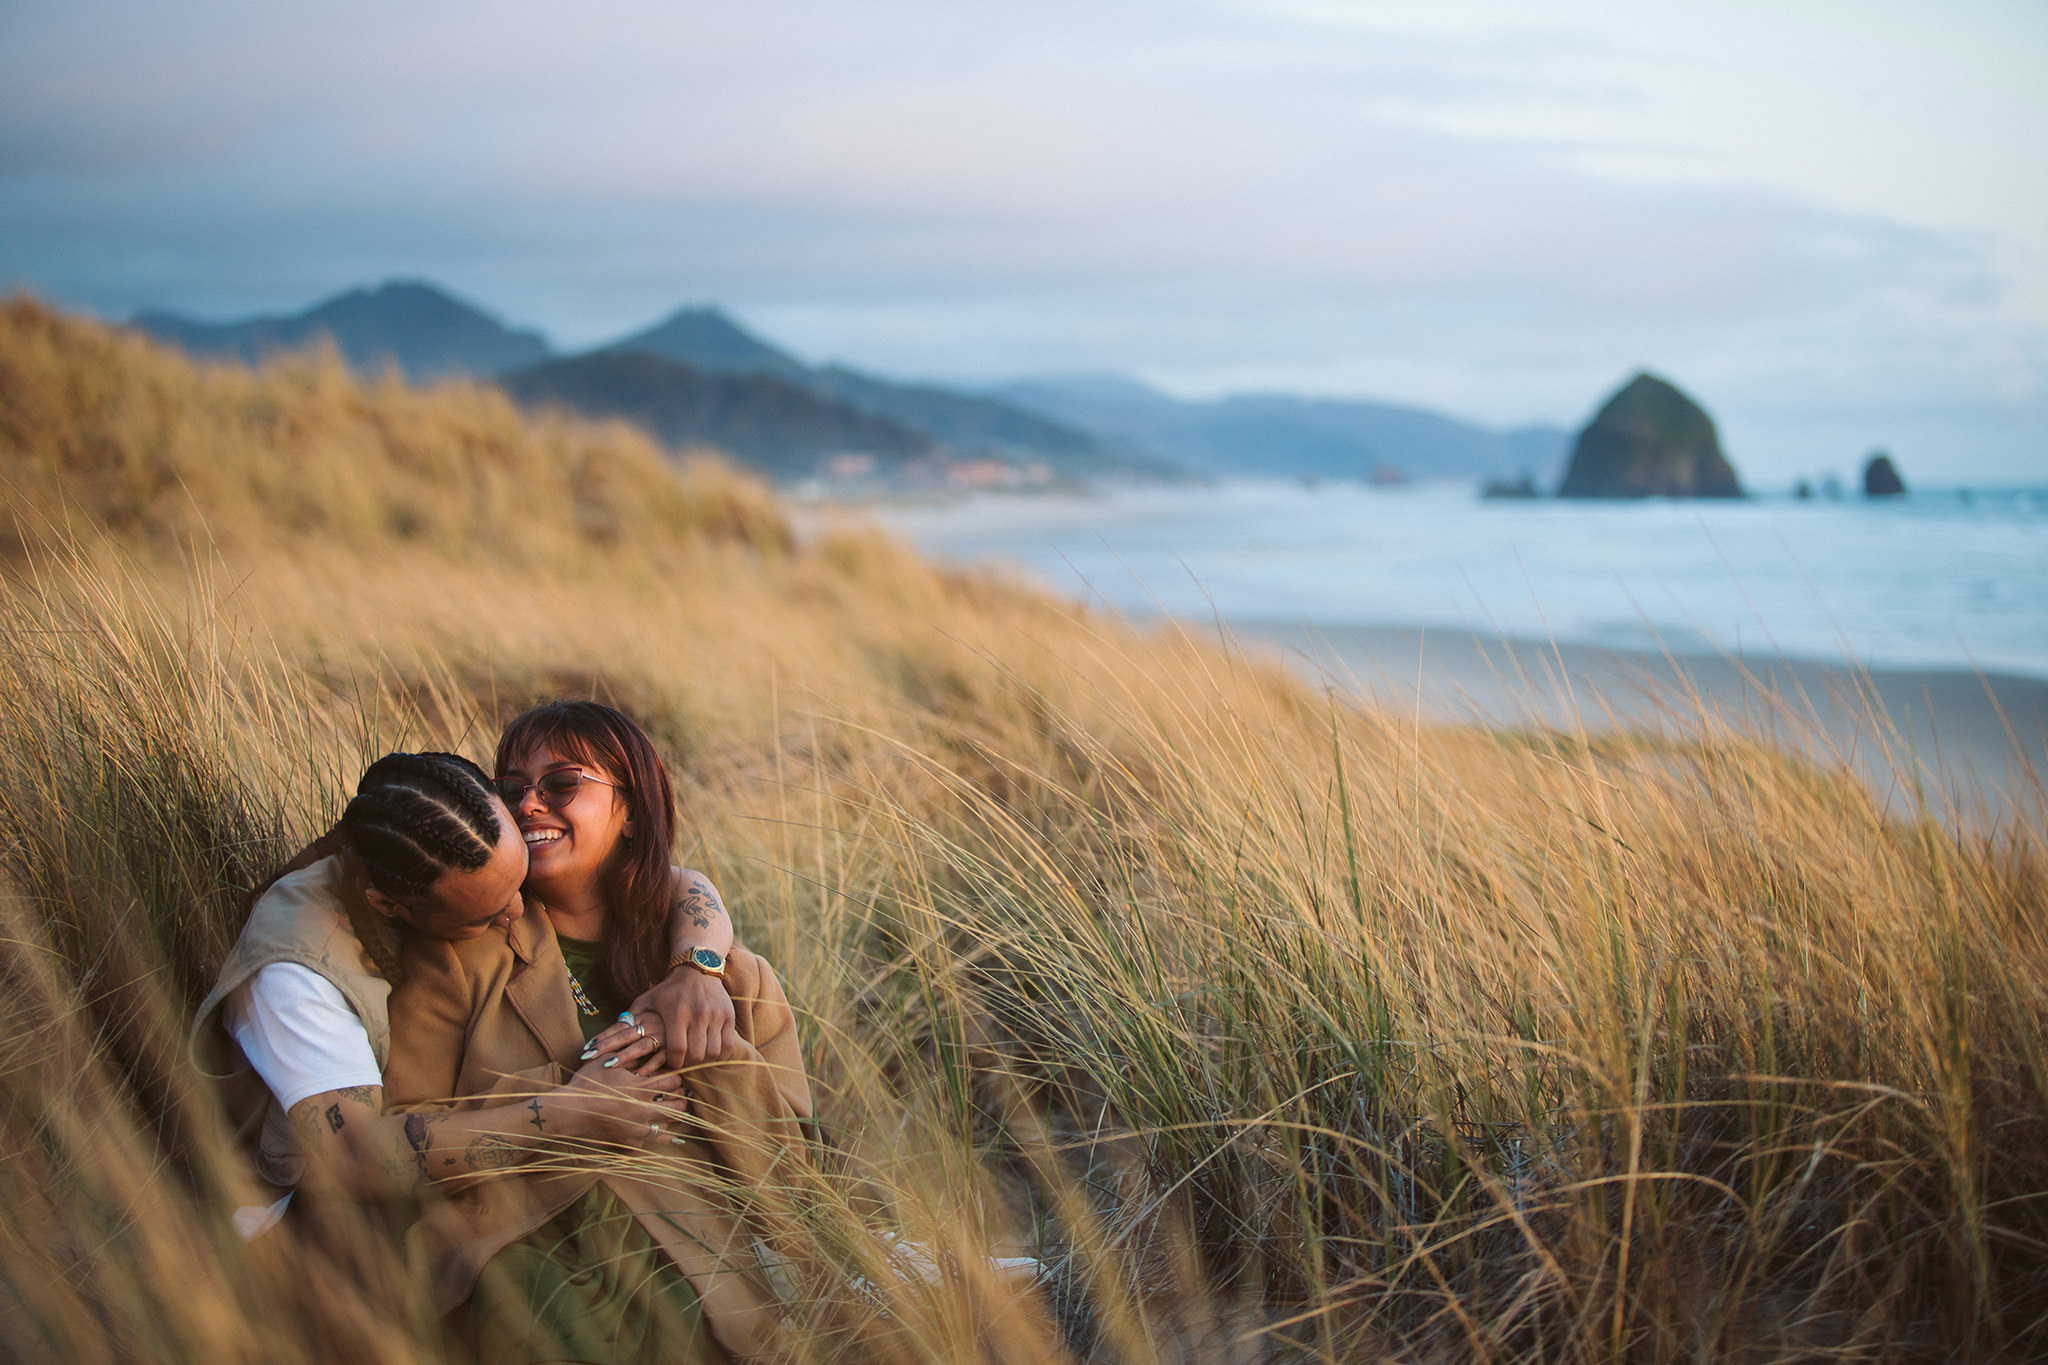 A couples photo in the sand dunes on the Oregon coast